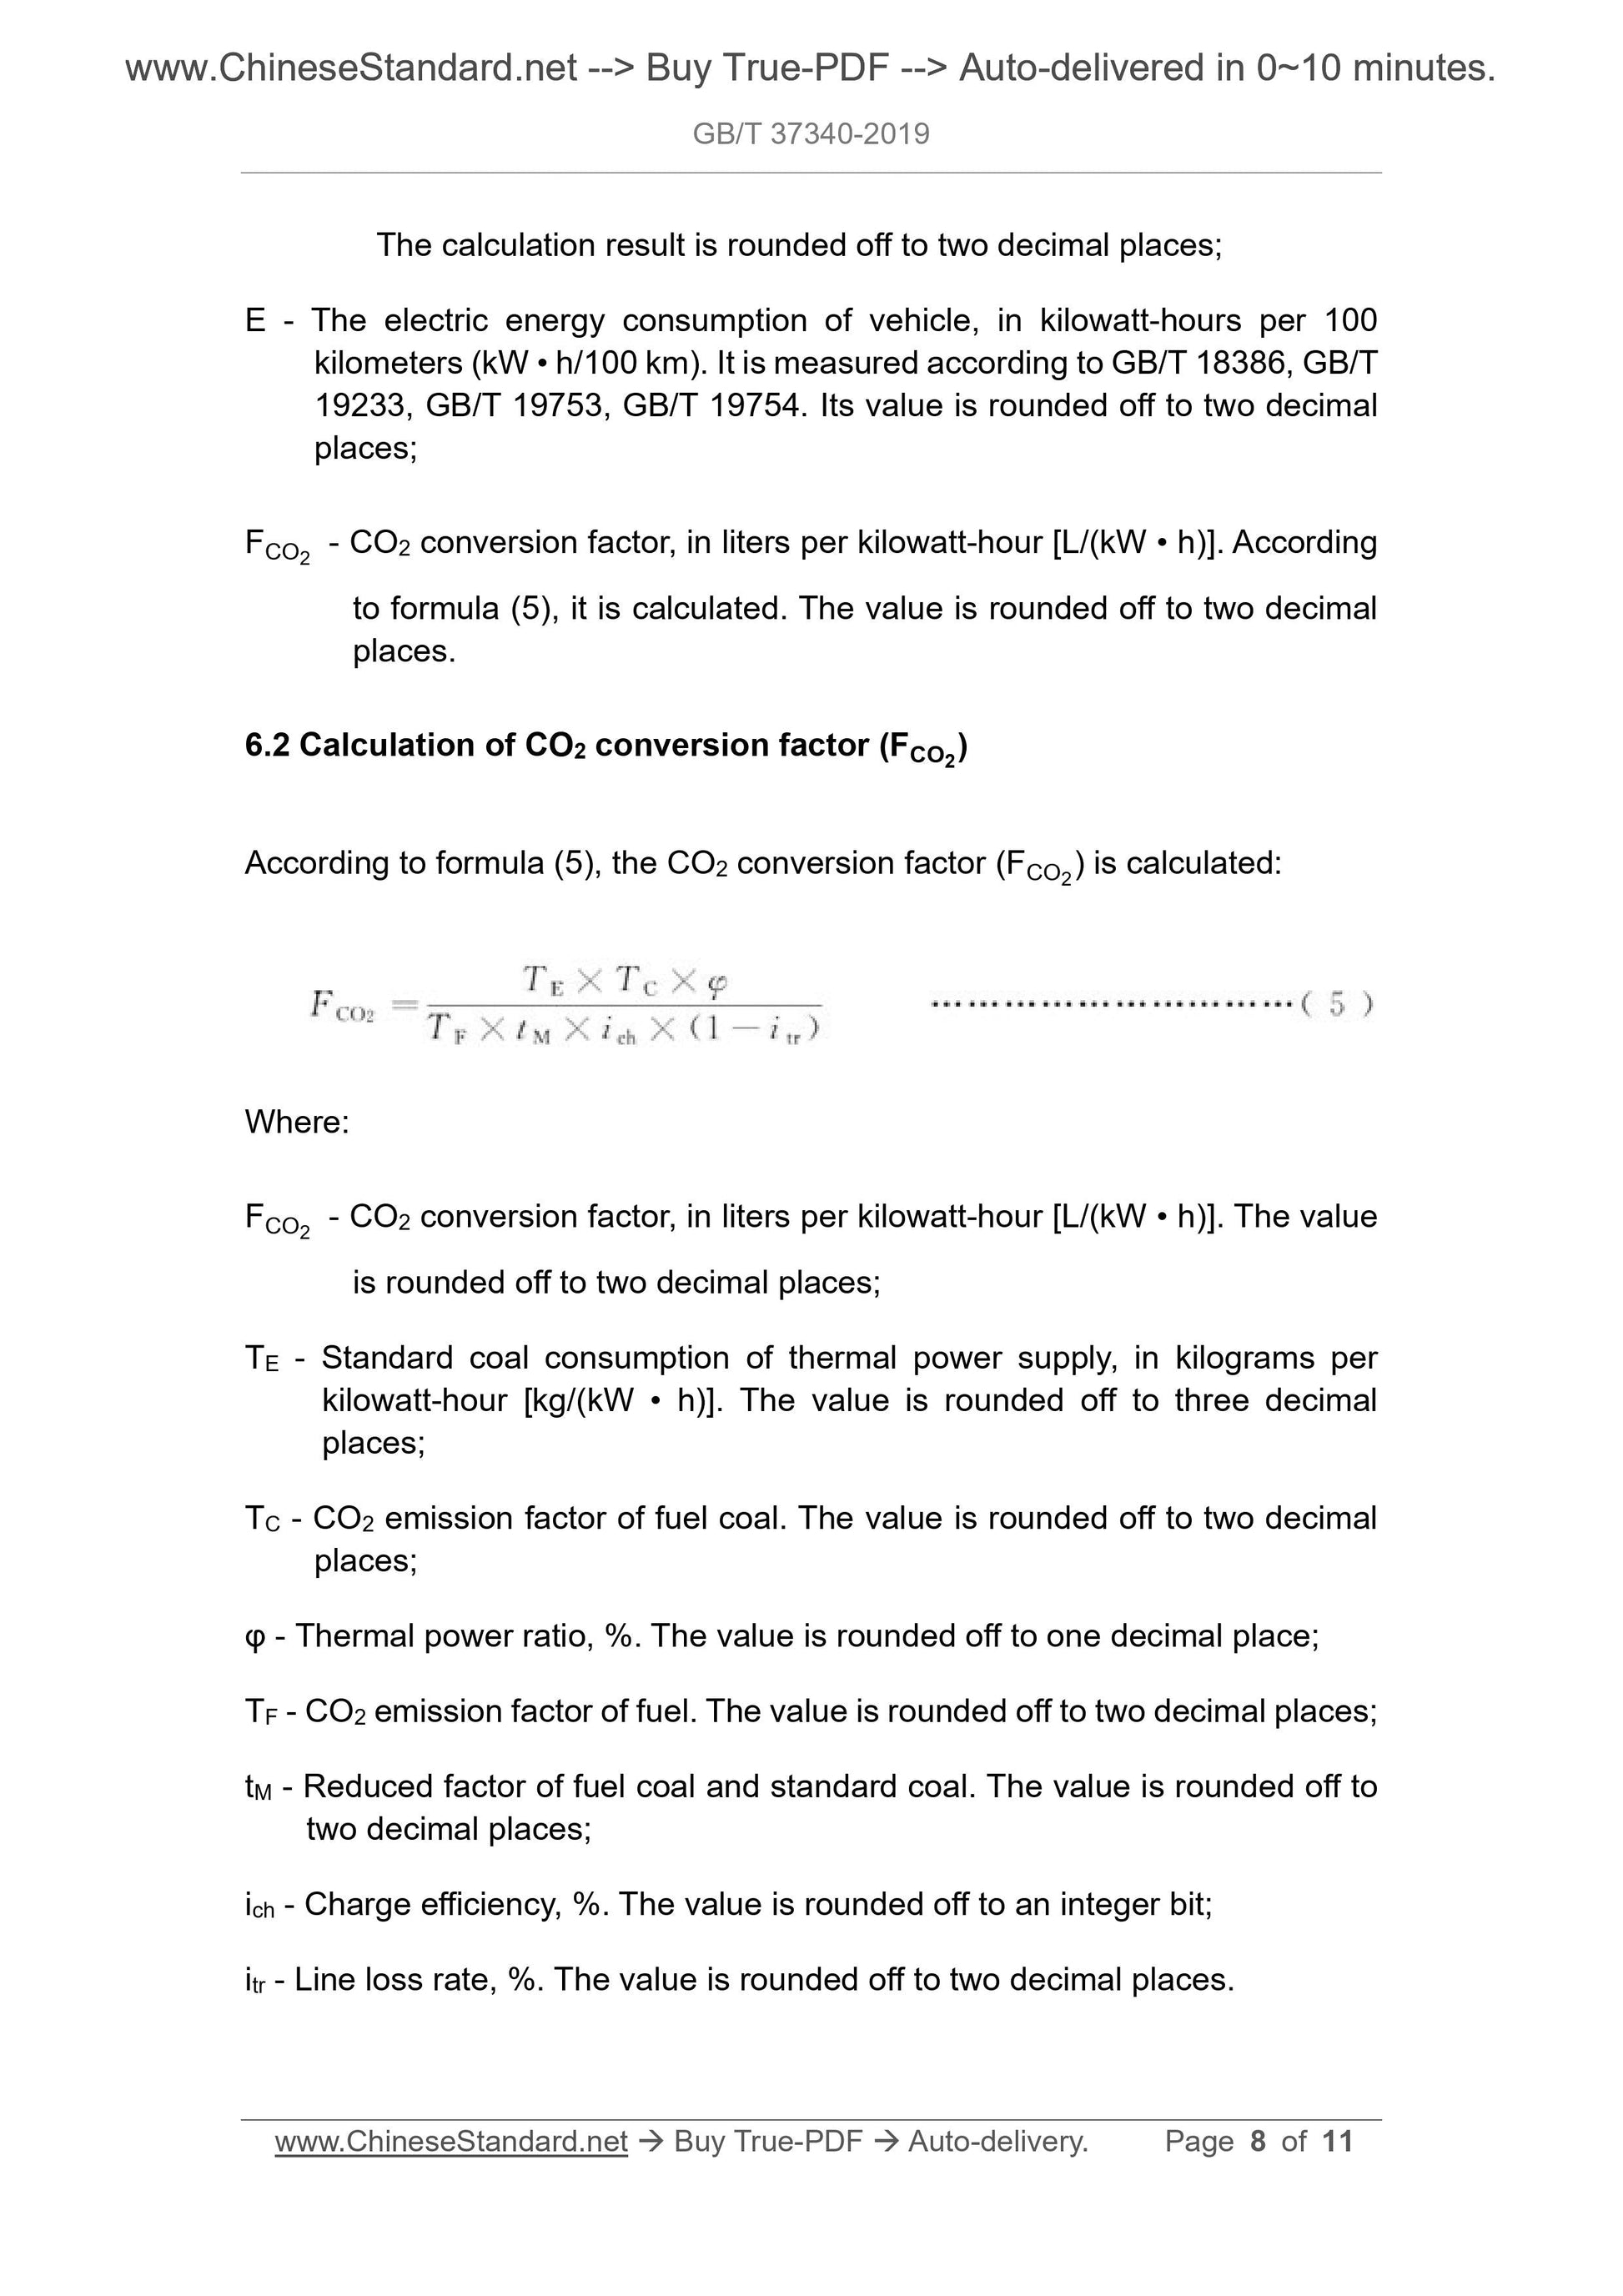 GB/T 37340-2019 Page 5